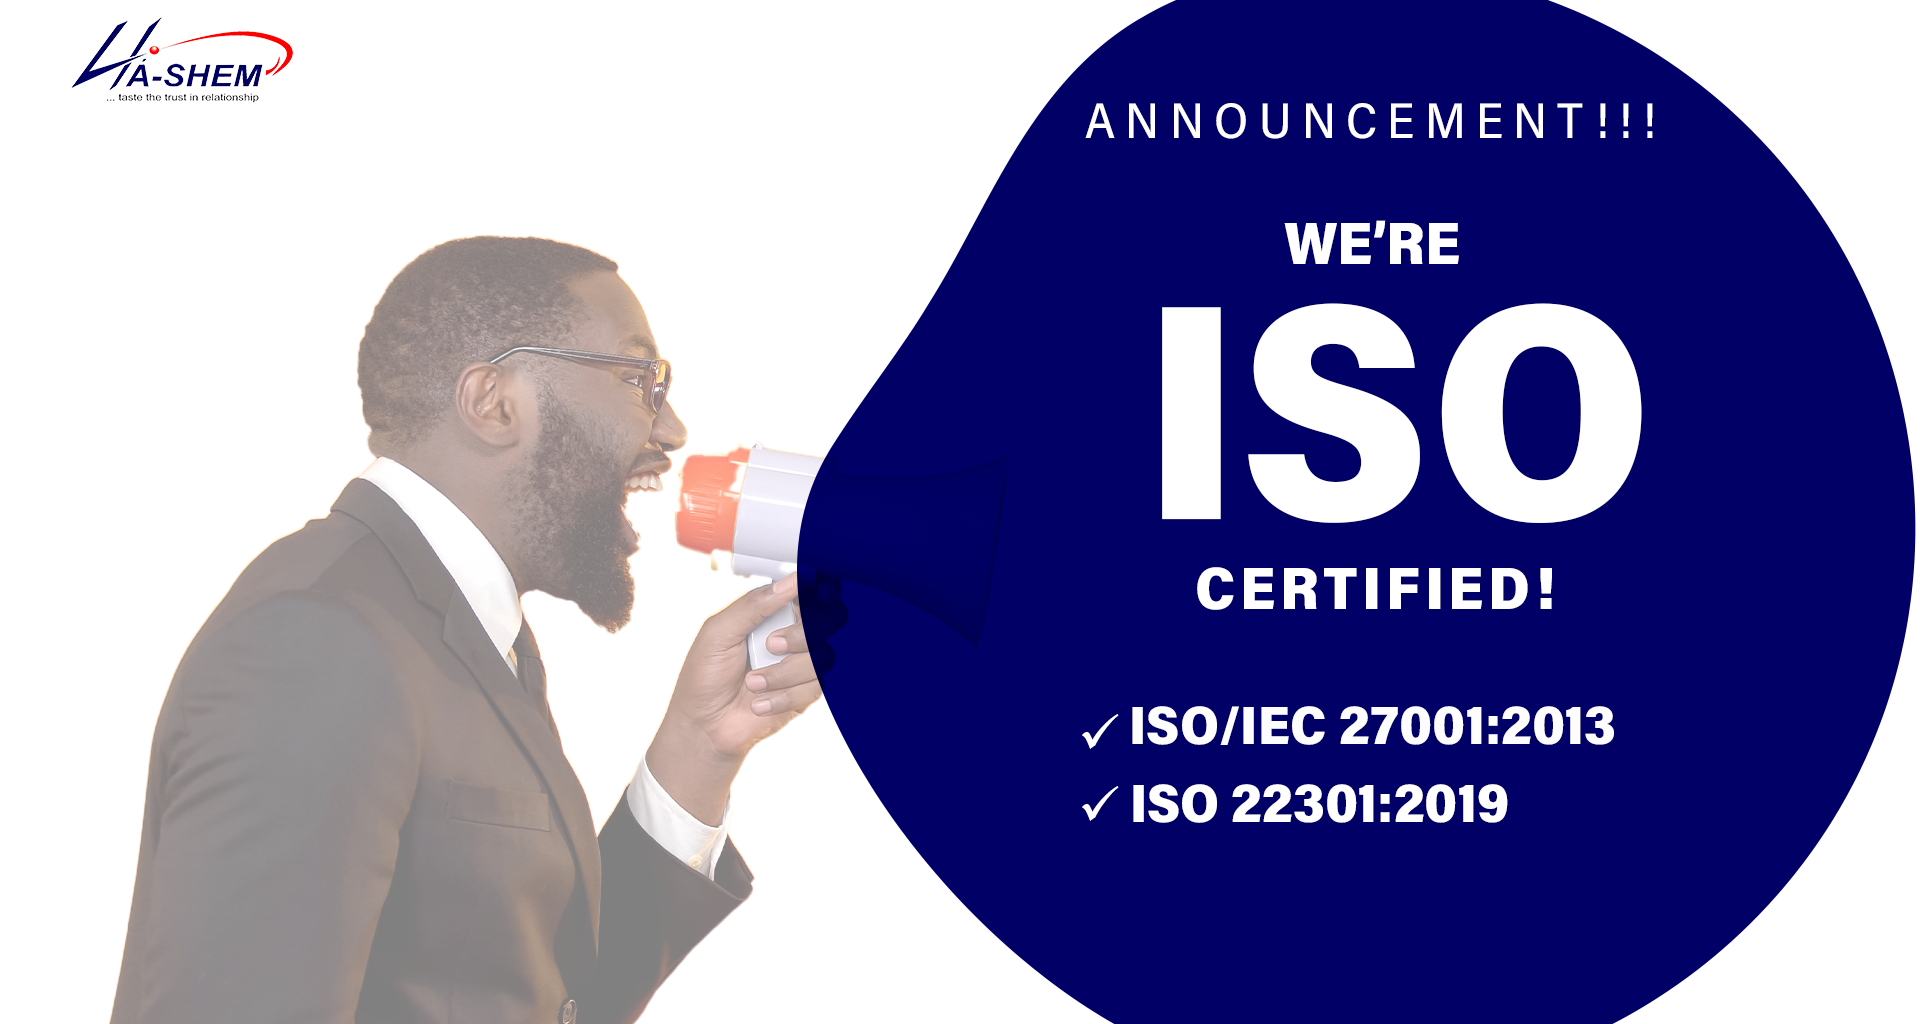 Ha-Shem Limited Lands New ISO Certifications: ISO/IEC 27001:2013 and ISO 22301:2019